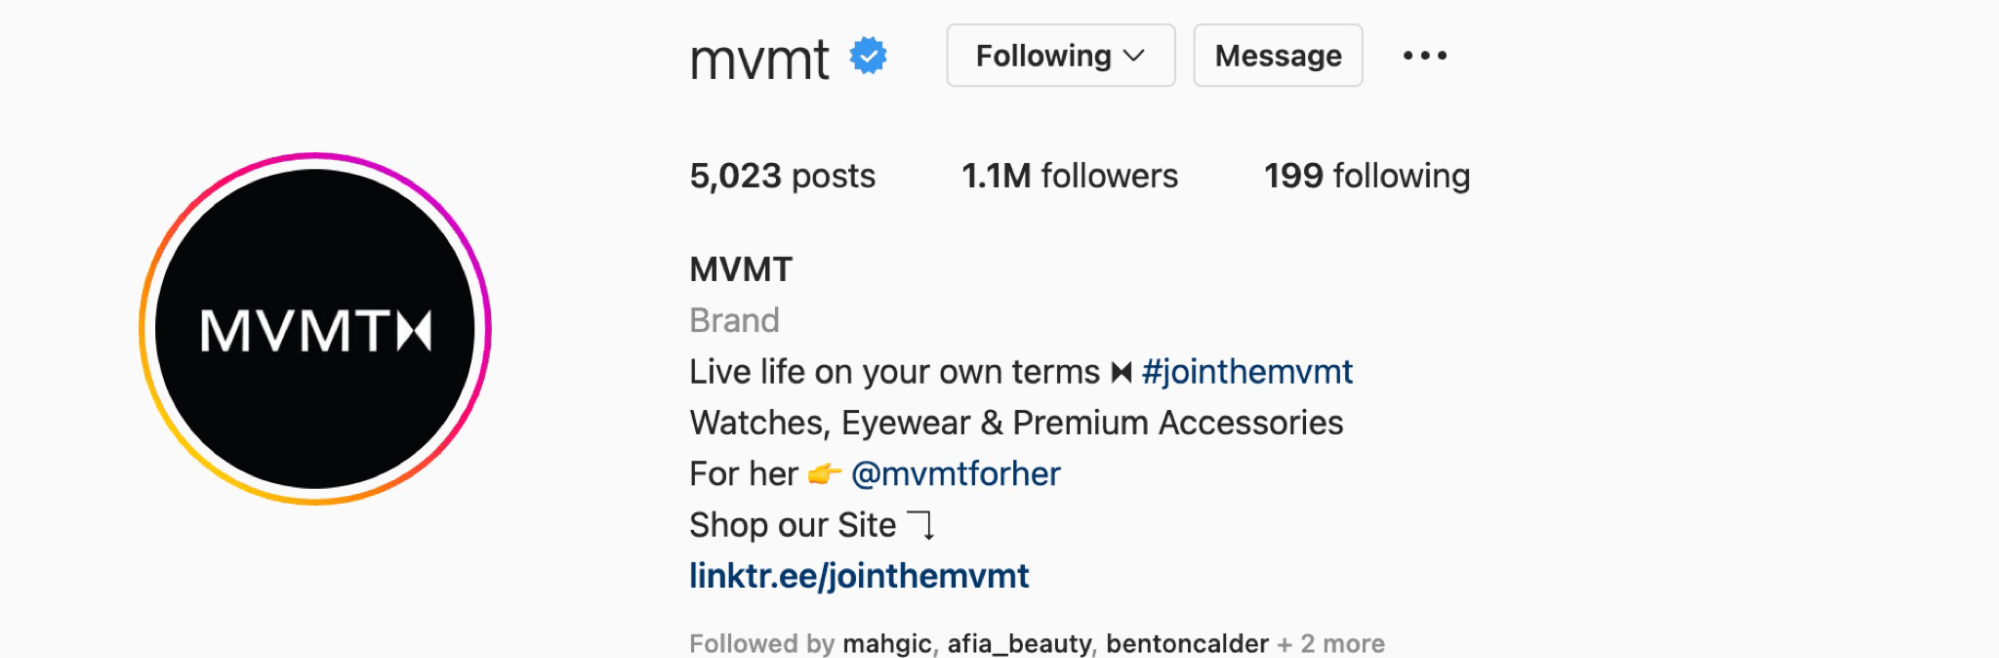 A screenshot of MVMT's Instagram profile showing how it promotes UGC through its branded hashtag and highlights.